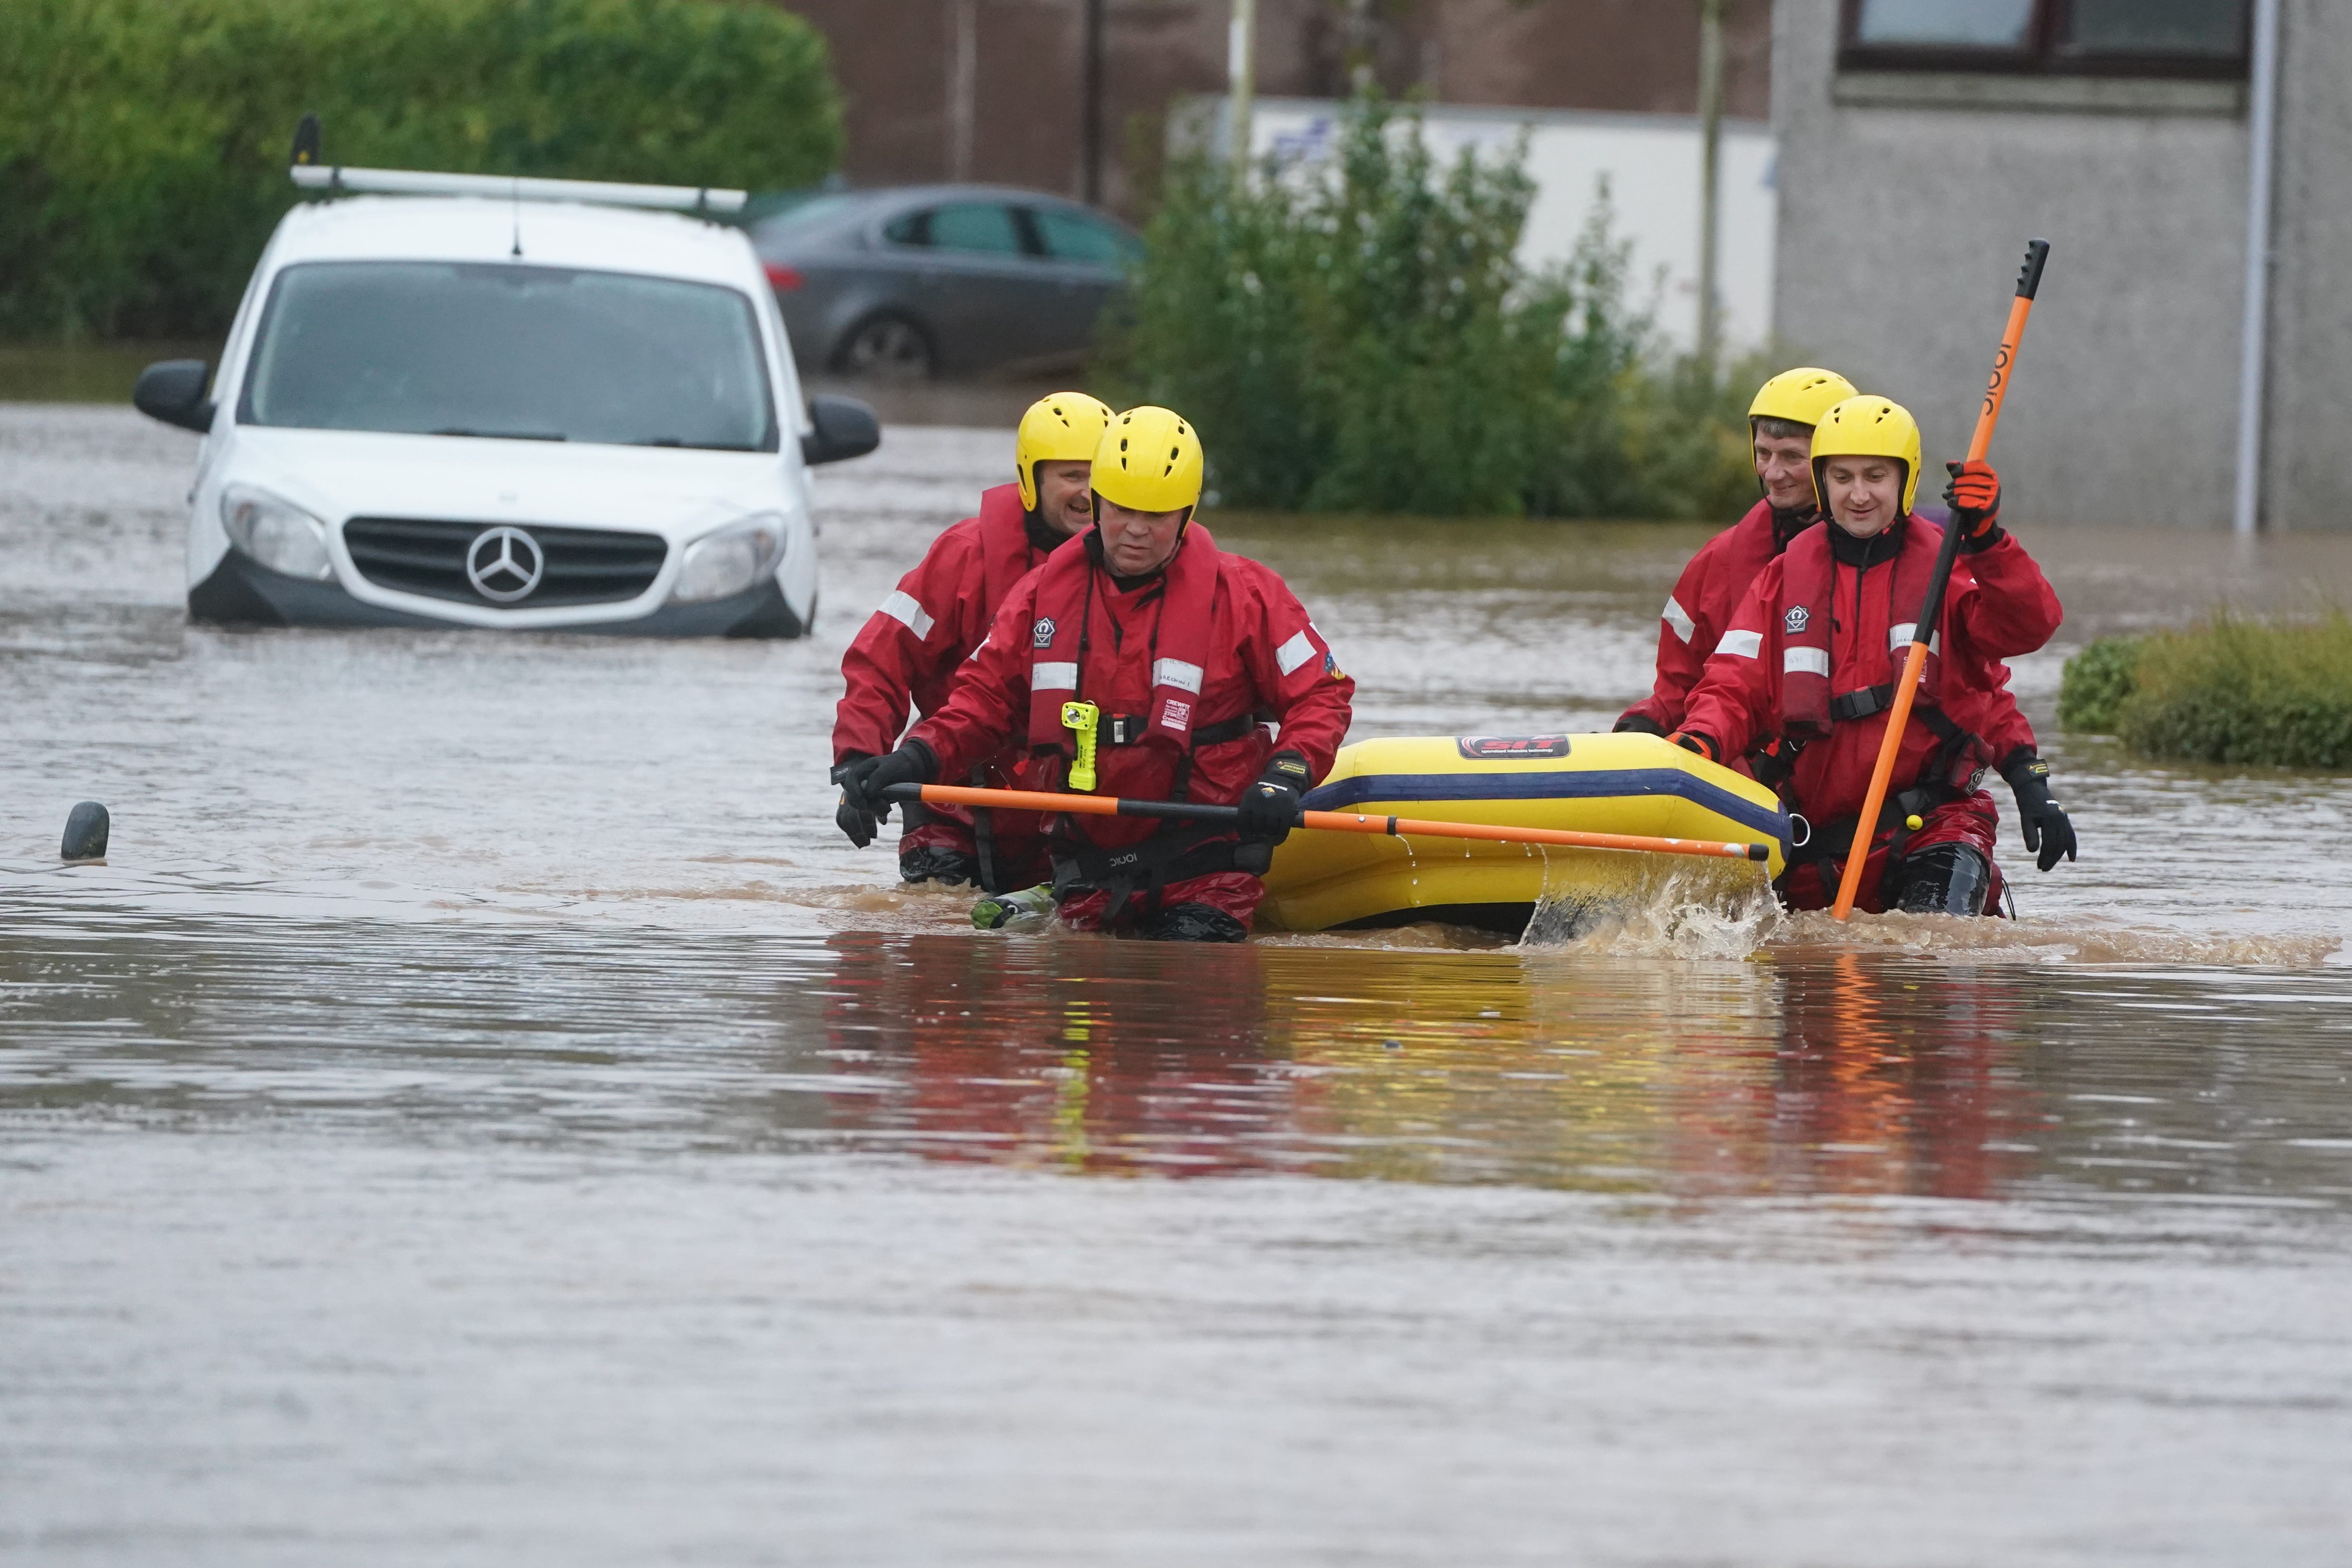 Members of a Coastguard Rescue Team helped residents in Brechin